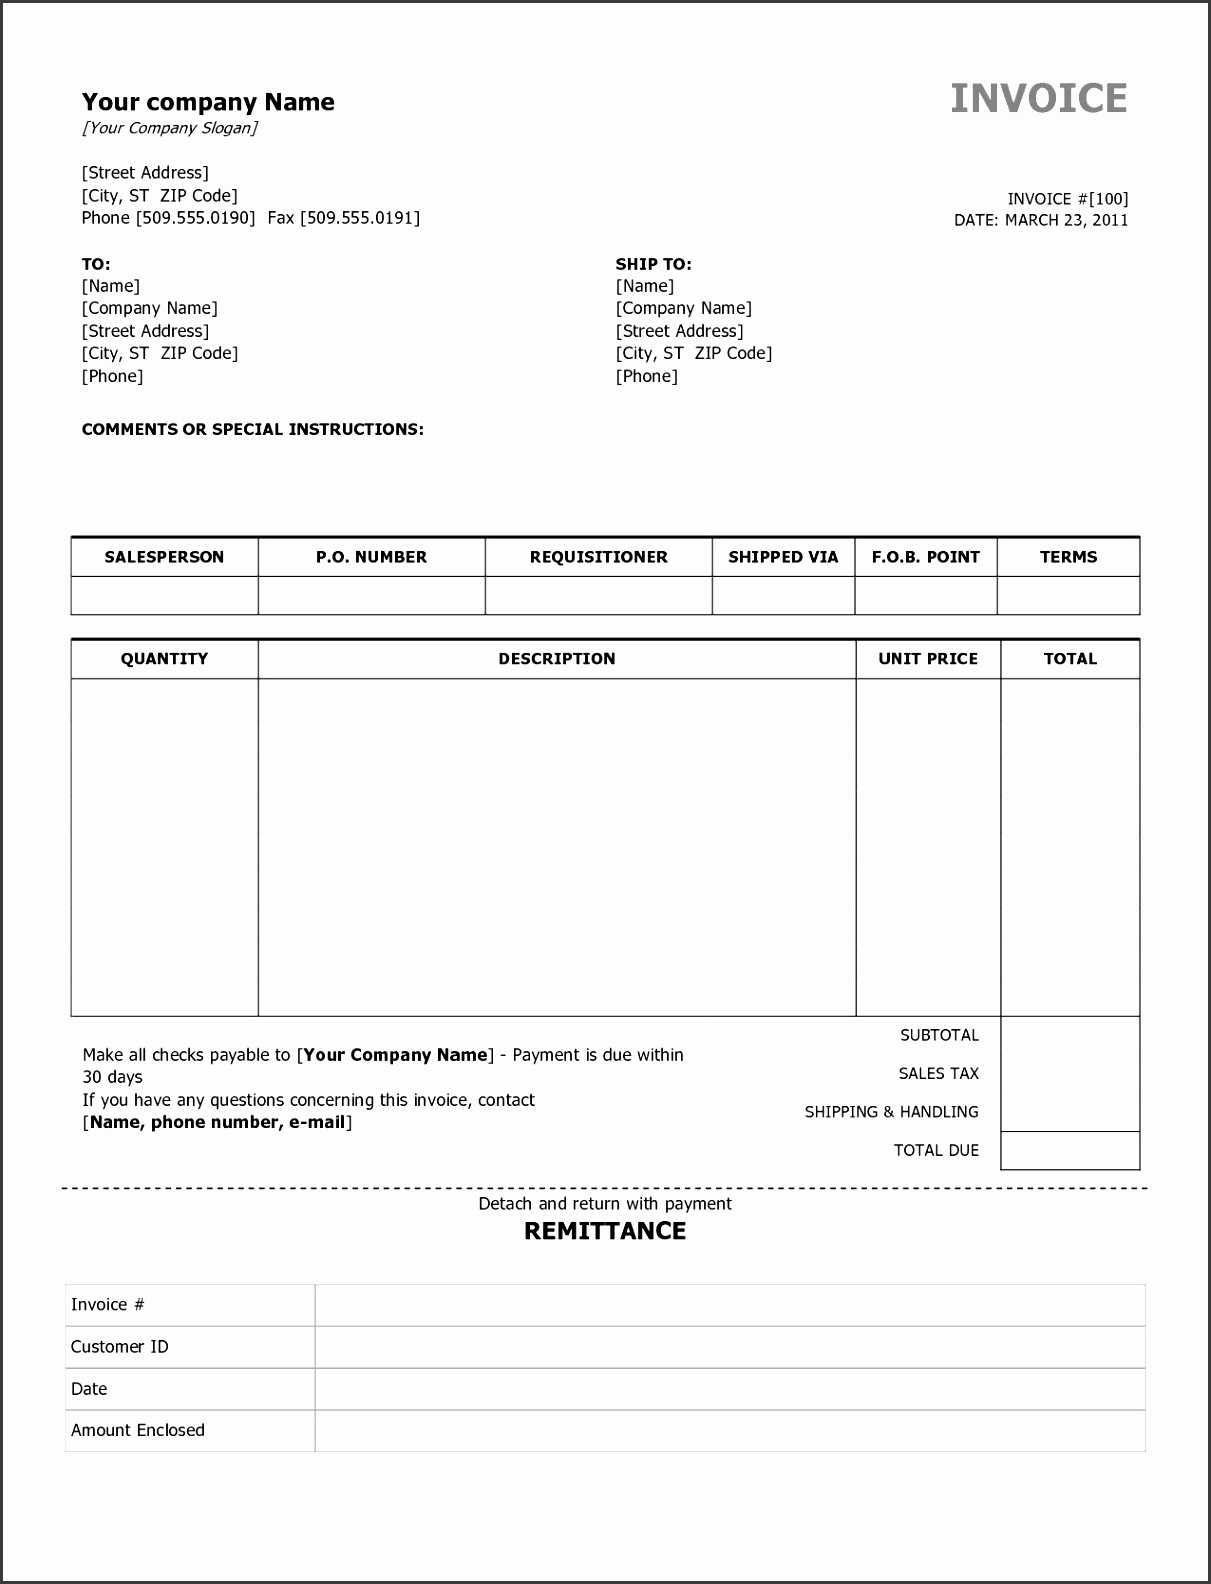 Proforma Invoice Template Best Sample Invoice Template Free Example Basic Nz Download Australia